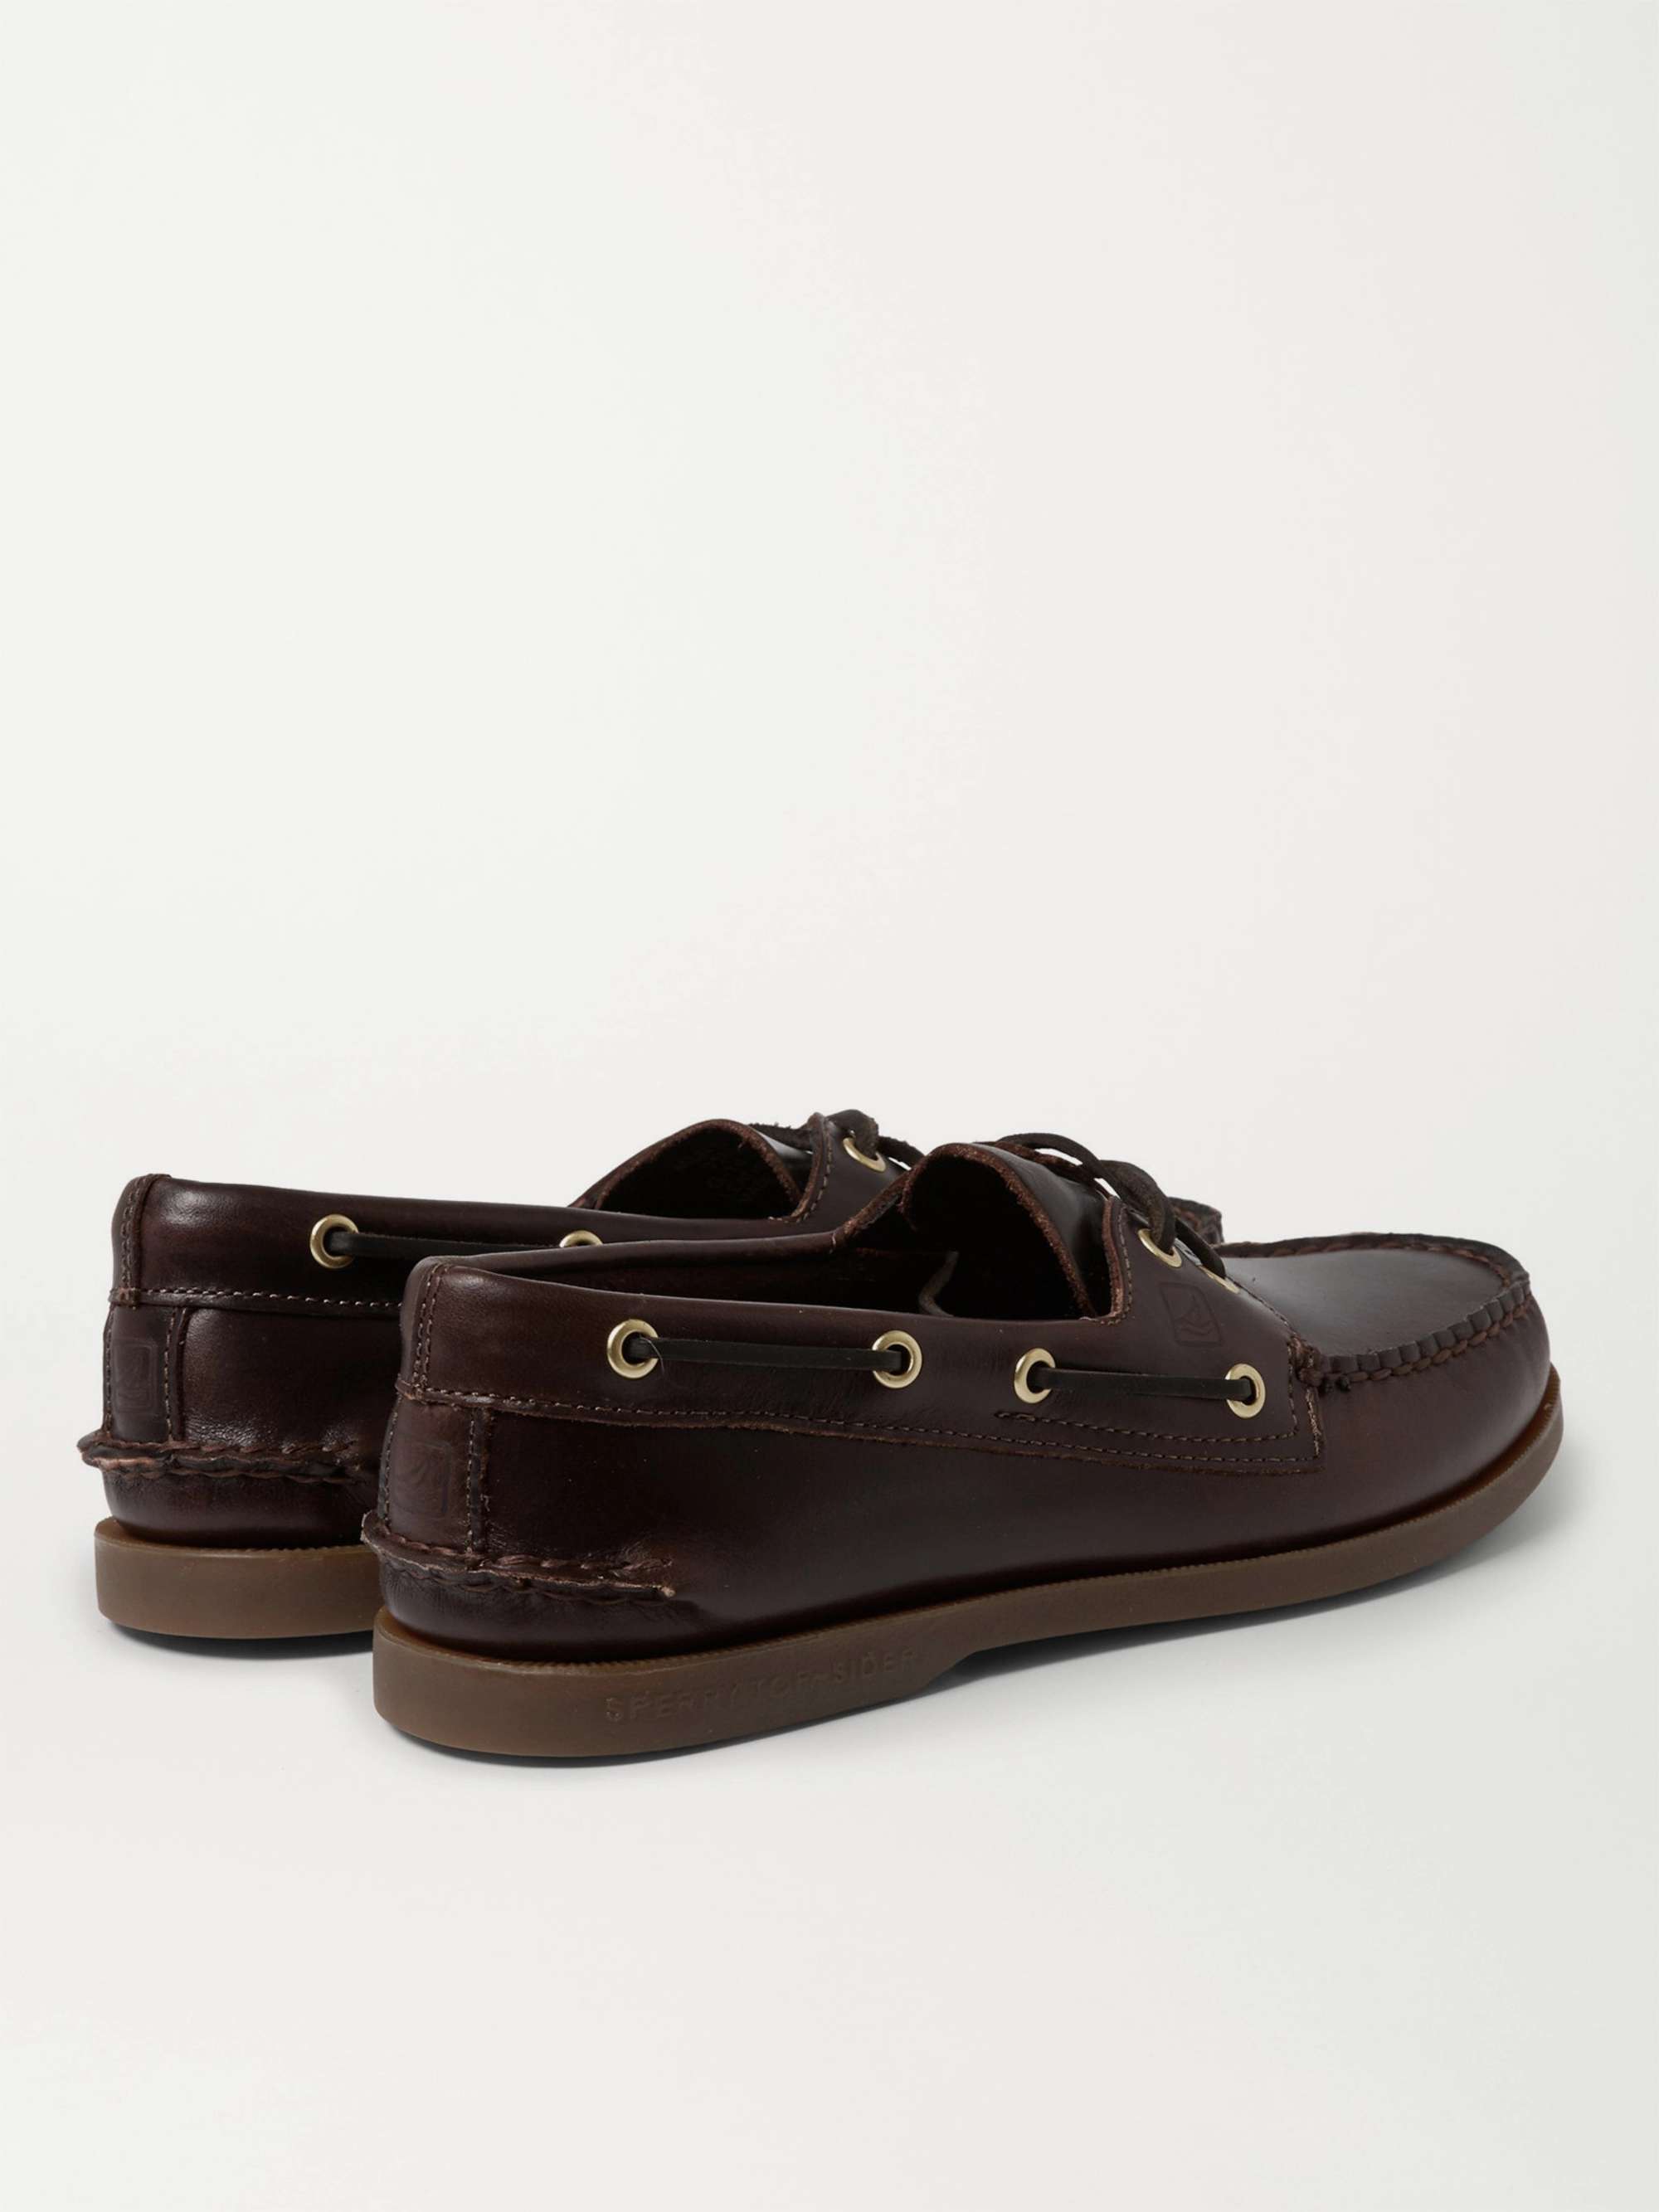 Sperry Authentic Original Burnished-Leather Boat Shoes